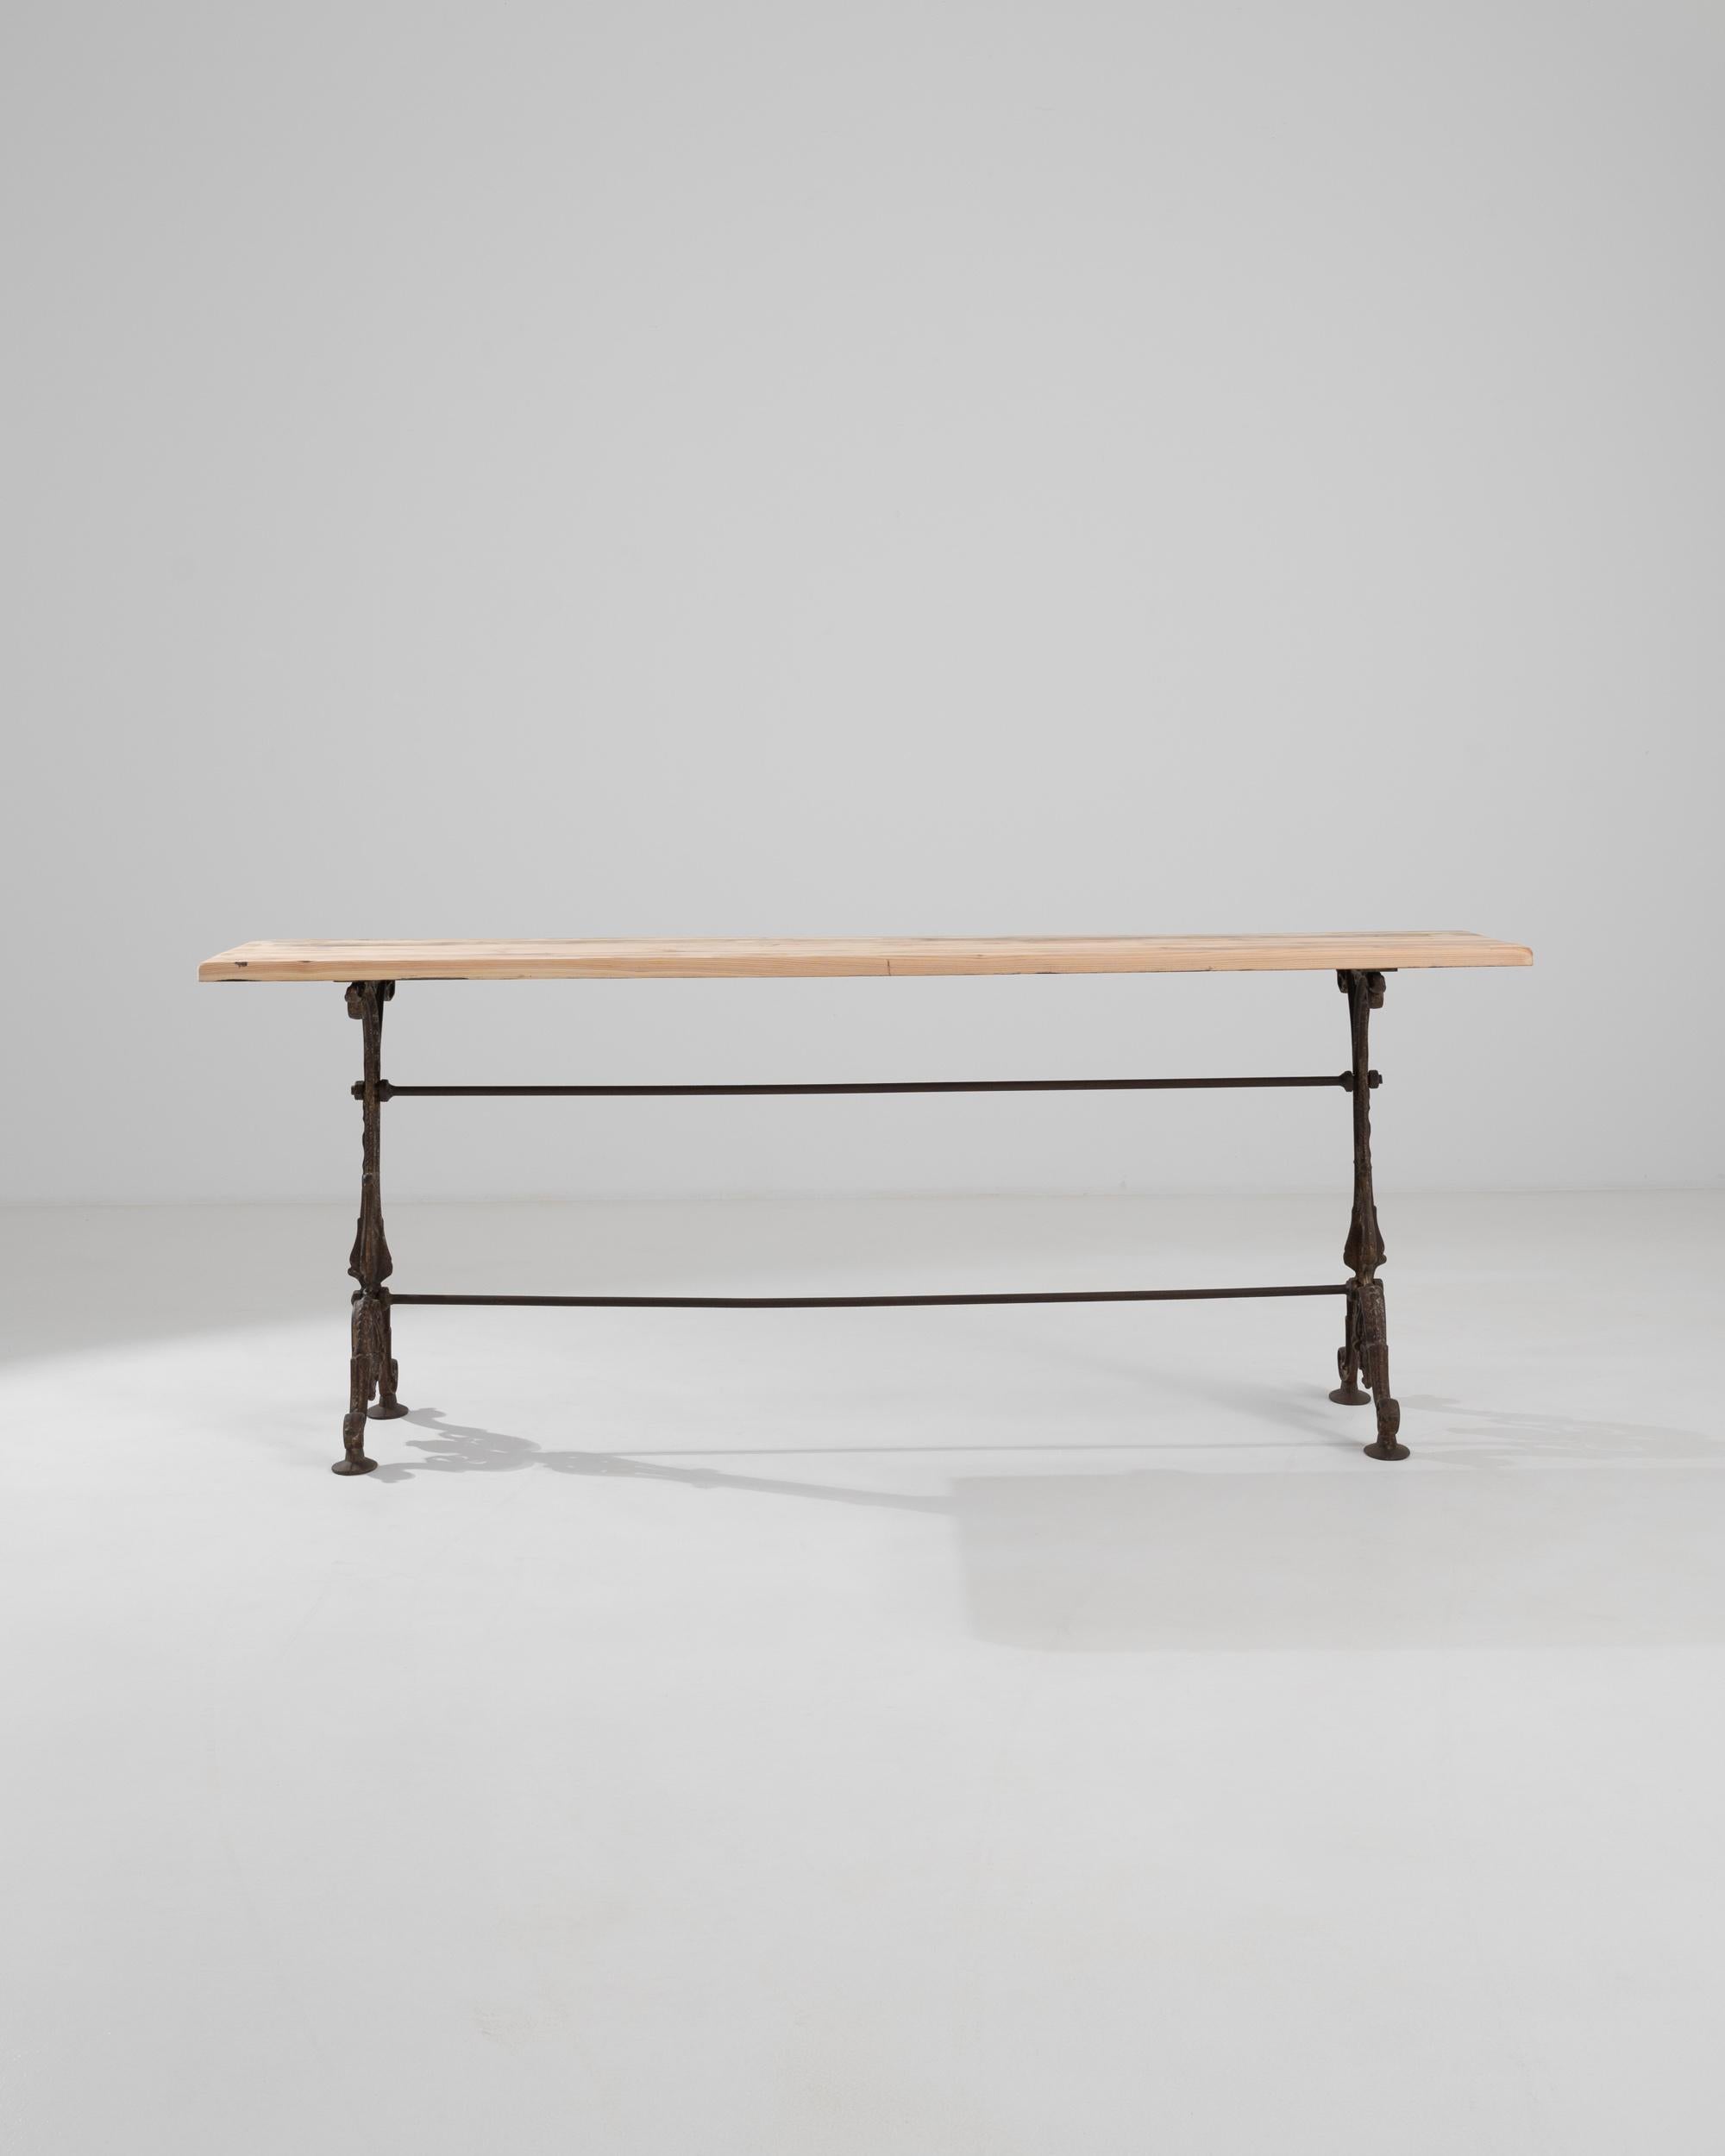 Slender and elegant, this vintage table makes a unique and versatile accent. Made in France at the turn of the century, a narrow rectangular tabletop in natural wood sits atop an elaborate cast iron base. Recalling the decorative Belle Epoque